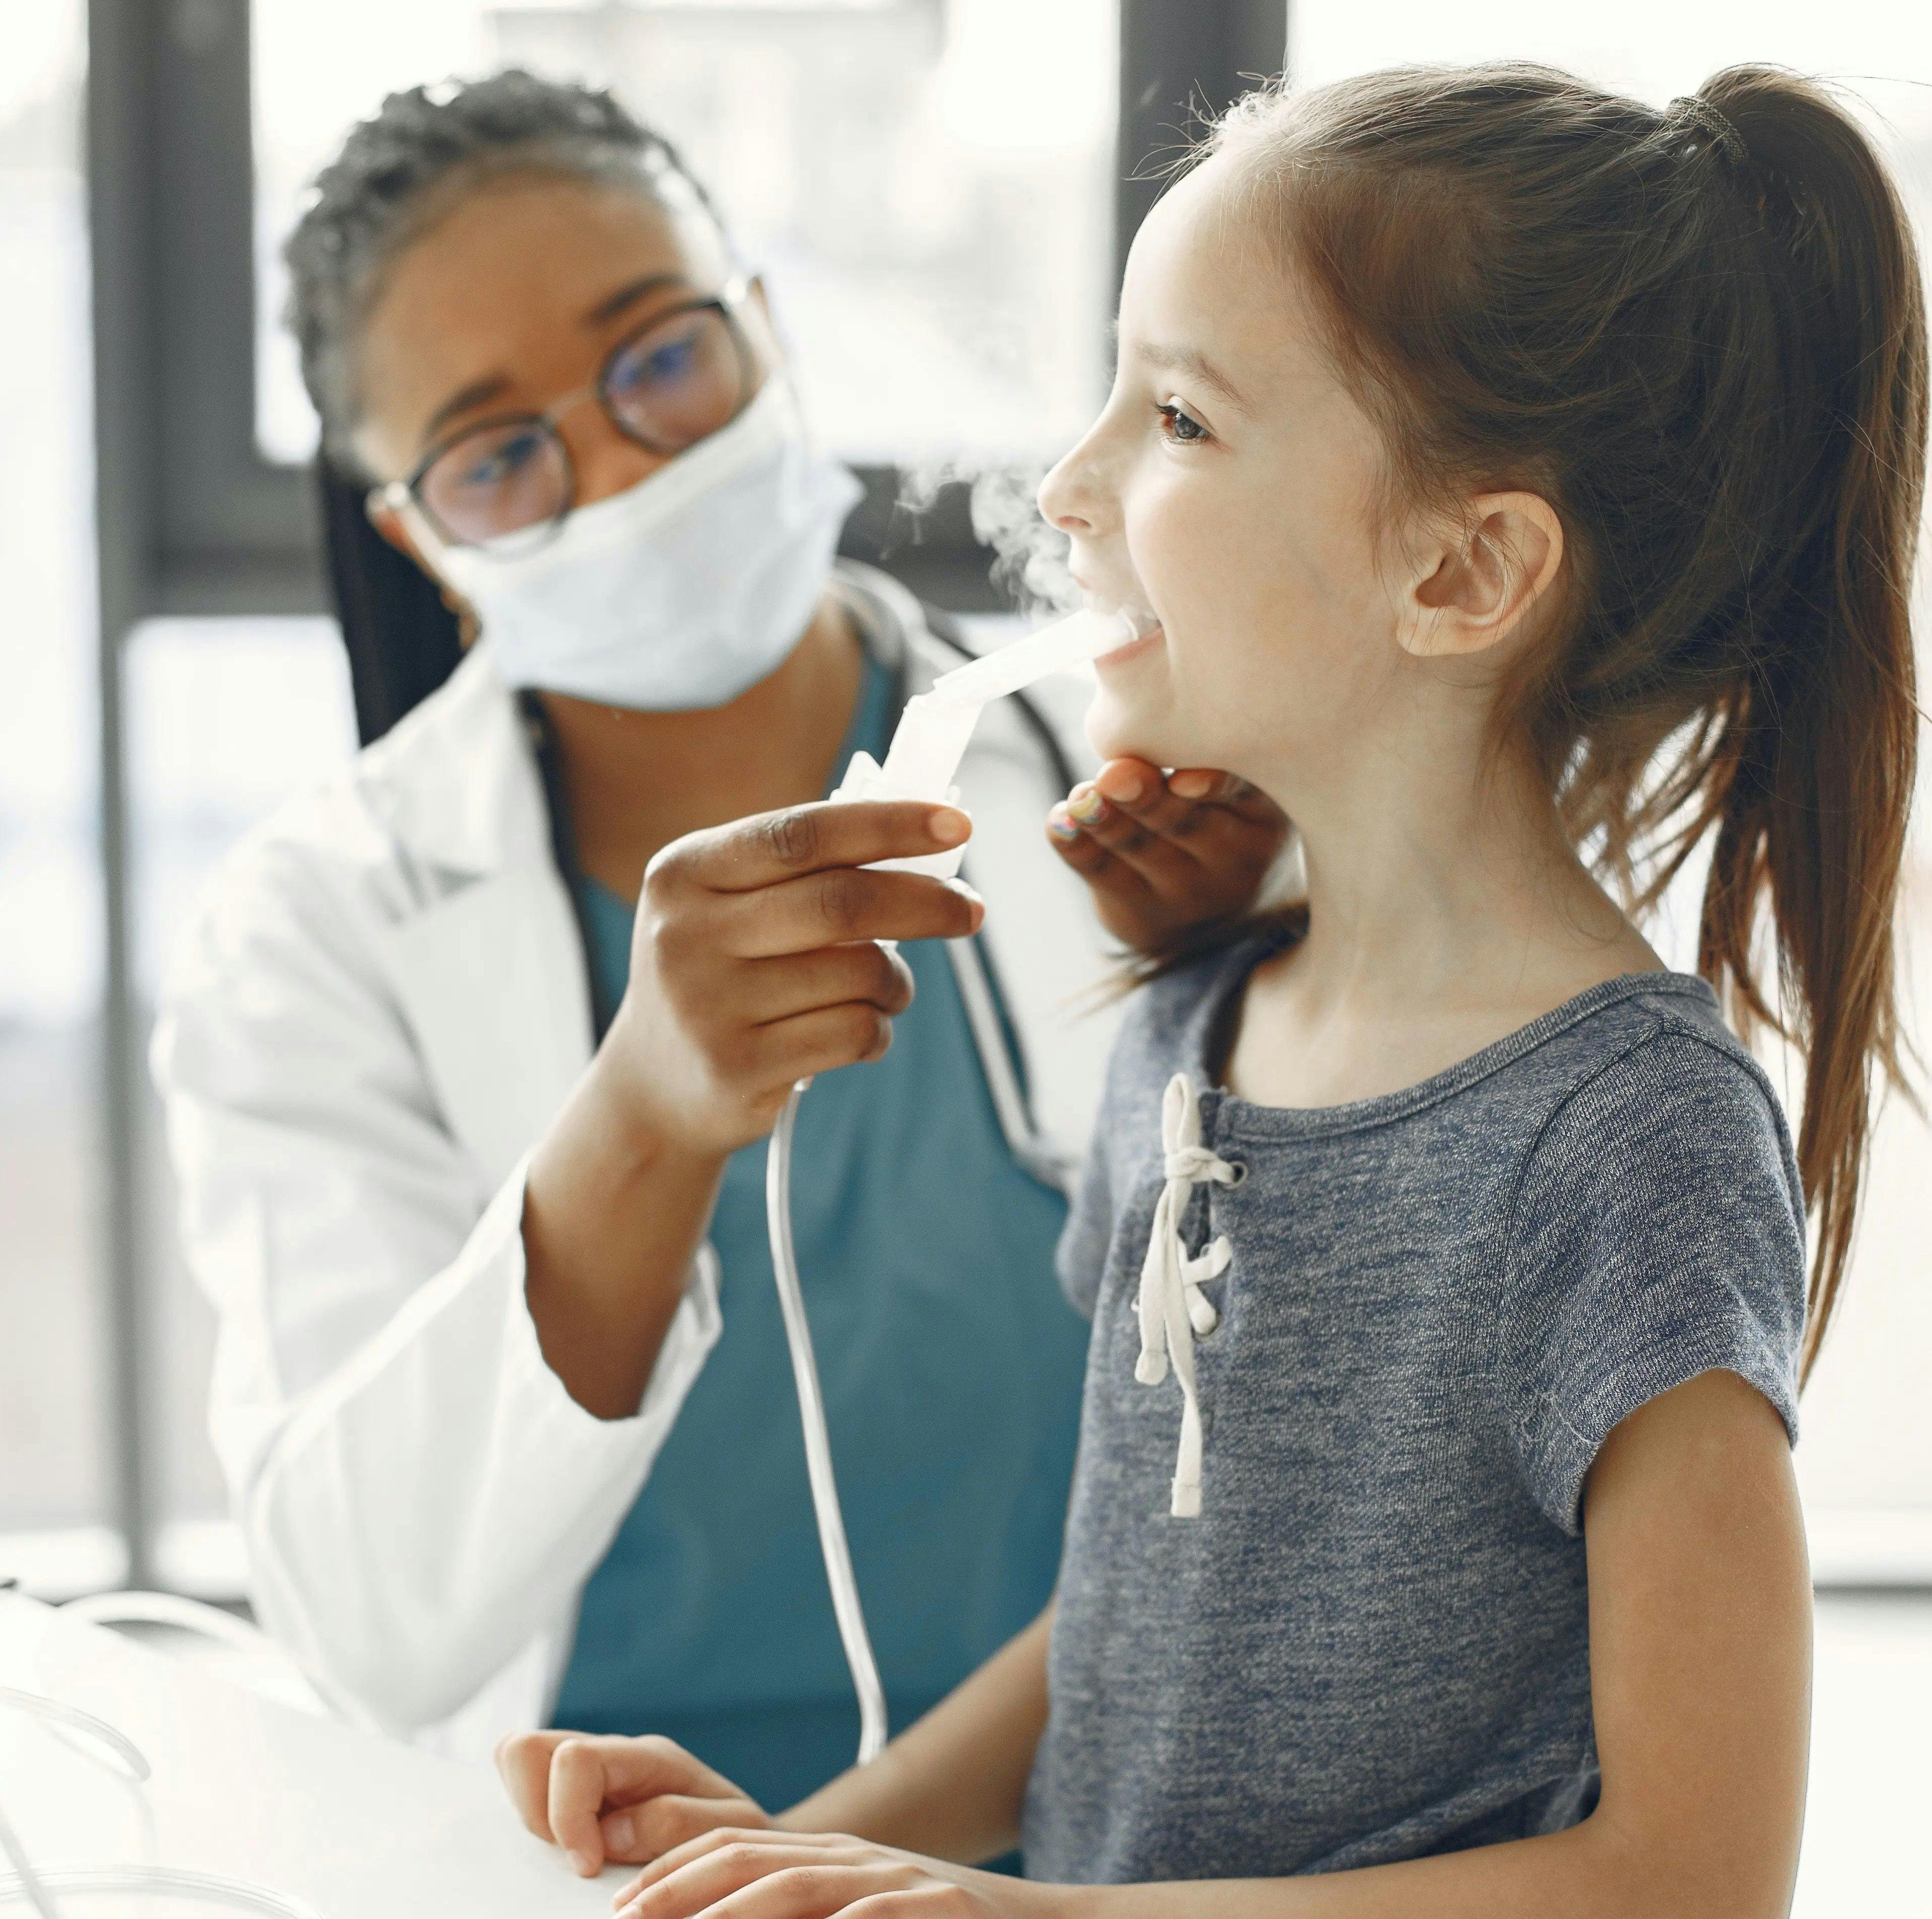 From cesarean section to childhood asthma: New evidence sheds light on the relationship